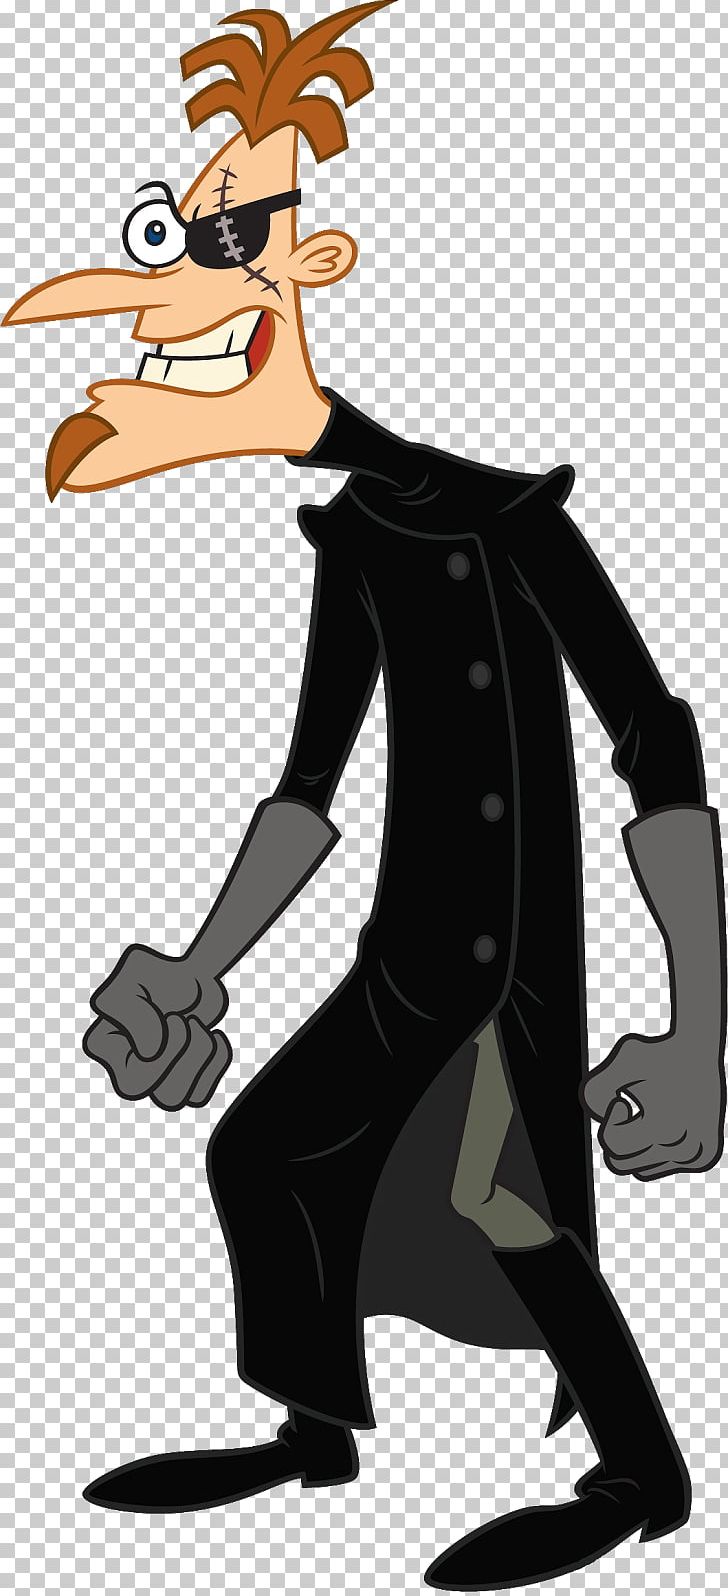 Dr. Heinz Doofenshmirtz Phineas Flynn Ferb Fletcher Perry The Platypus Candace Flynn PNG, Clipart, Cartoon, Fictional Character, Mammal, Others, Phineas Free PNG Download